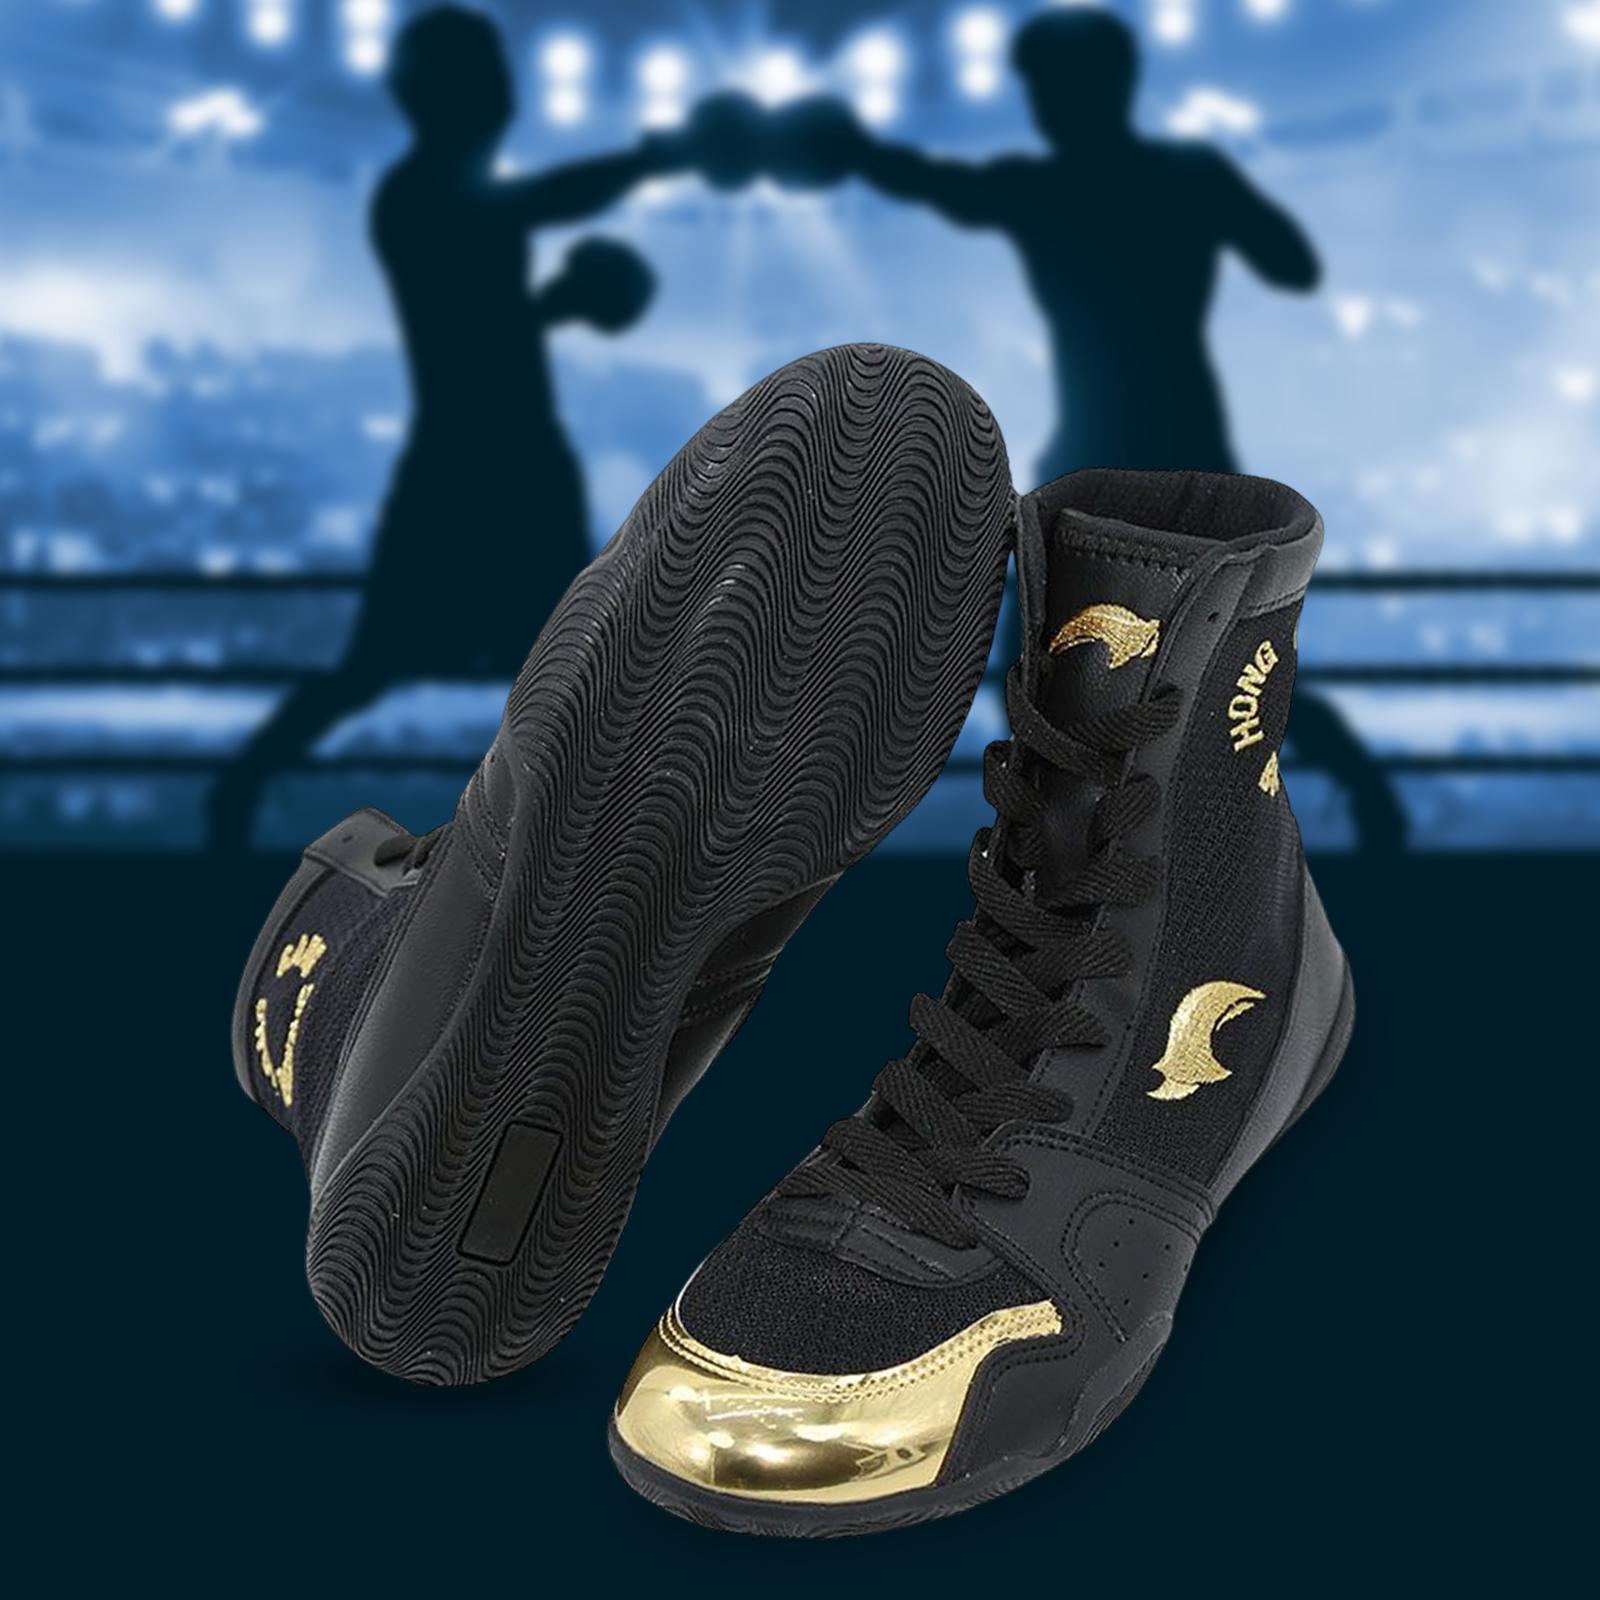 Kick Boxing Shoes Wrestling Boots Practice for Grappling Taekwondo Mma 43